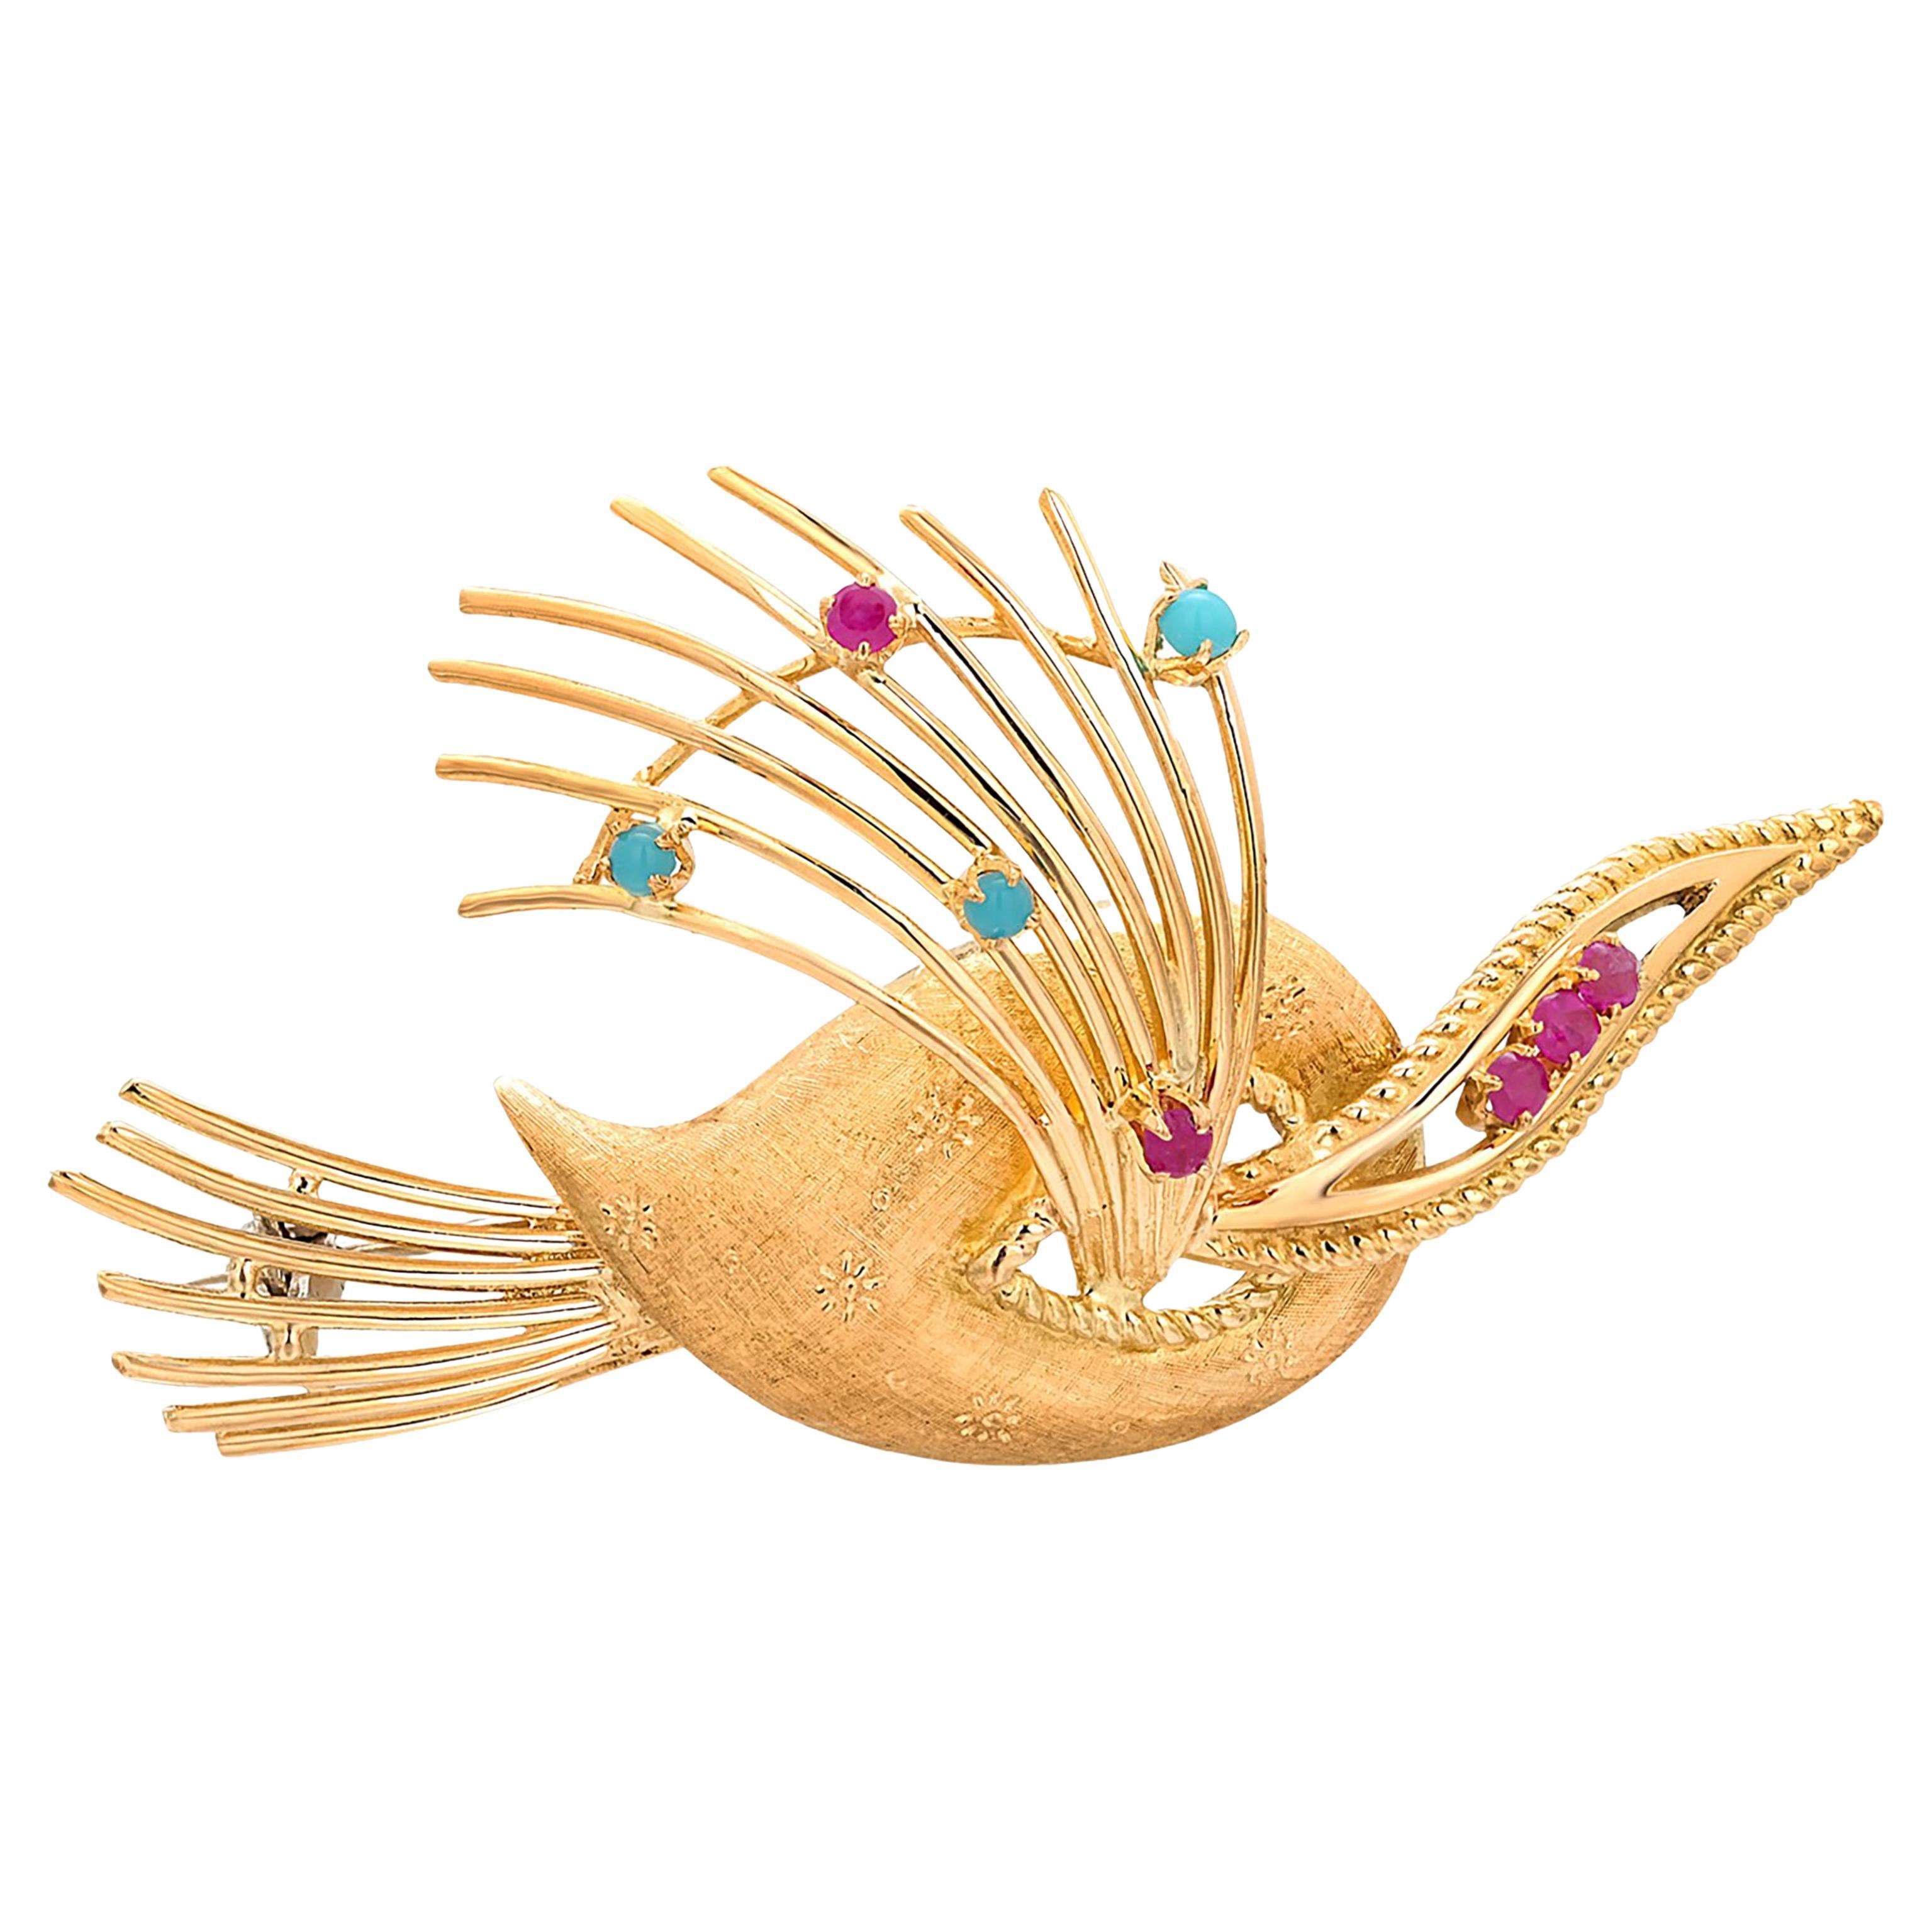 Retro Rare Cartier Vintage 18 Karat Yellow Gold Ruby Turquoise 2.4 Inch Spray Brooch  For Sale